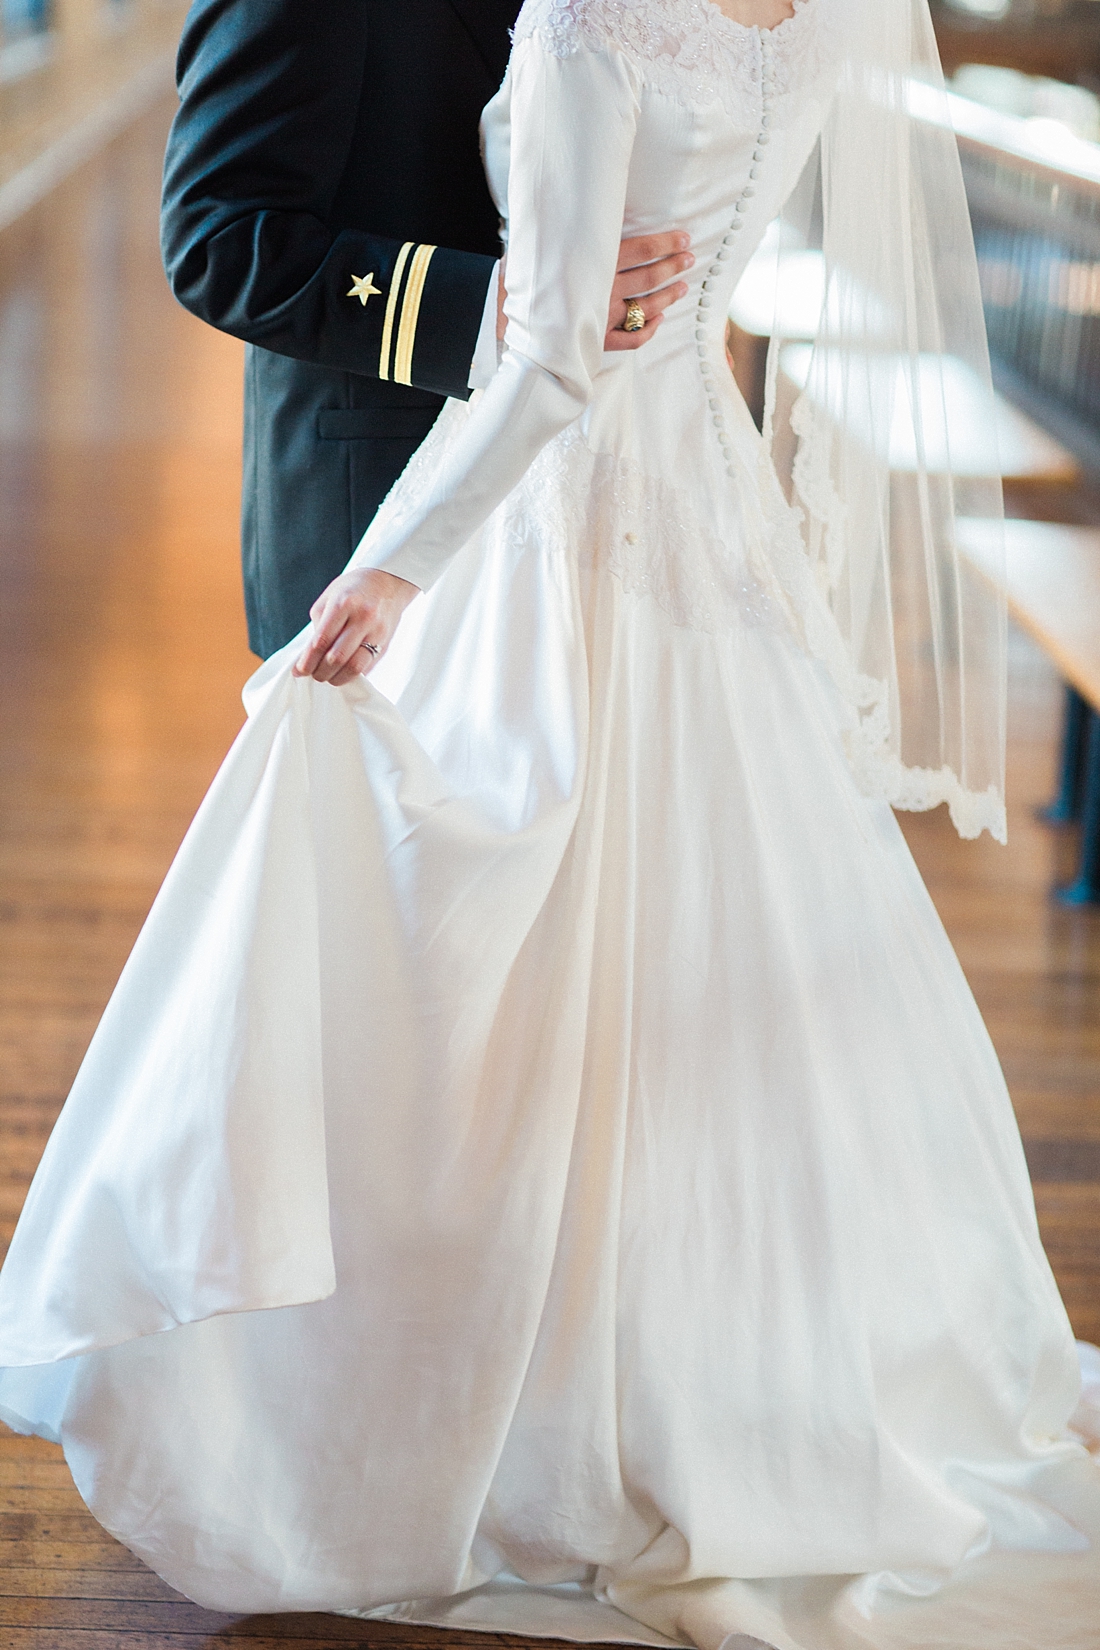 Coral + navy US Naval Academy wedding | Abby Grace Photography